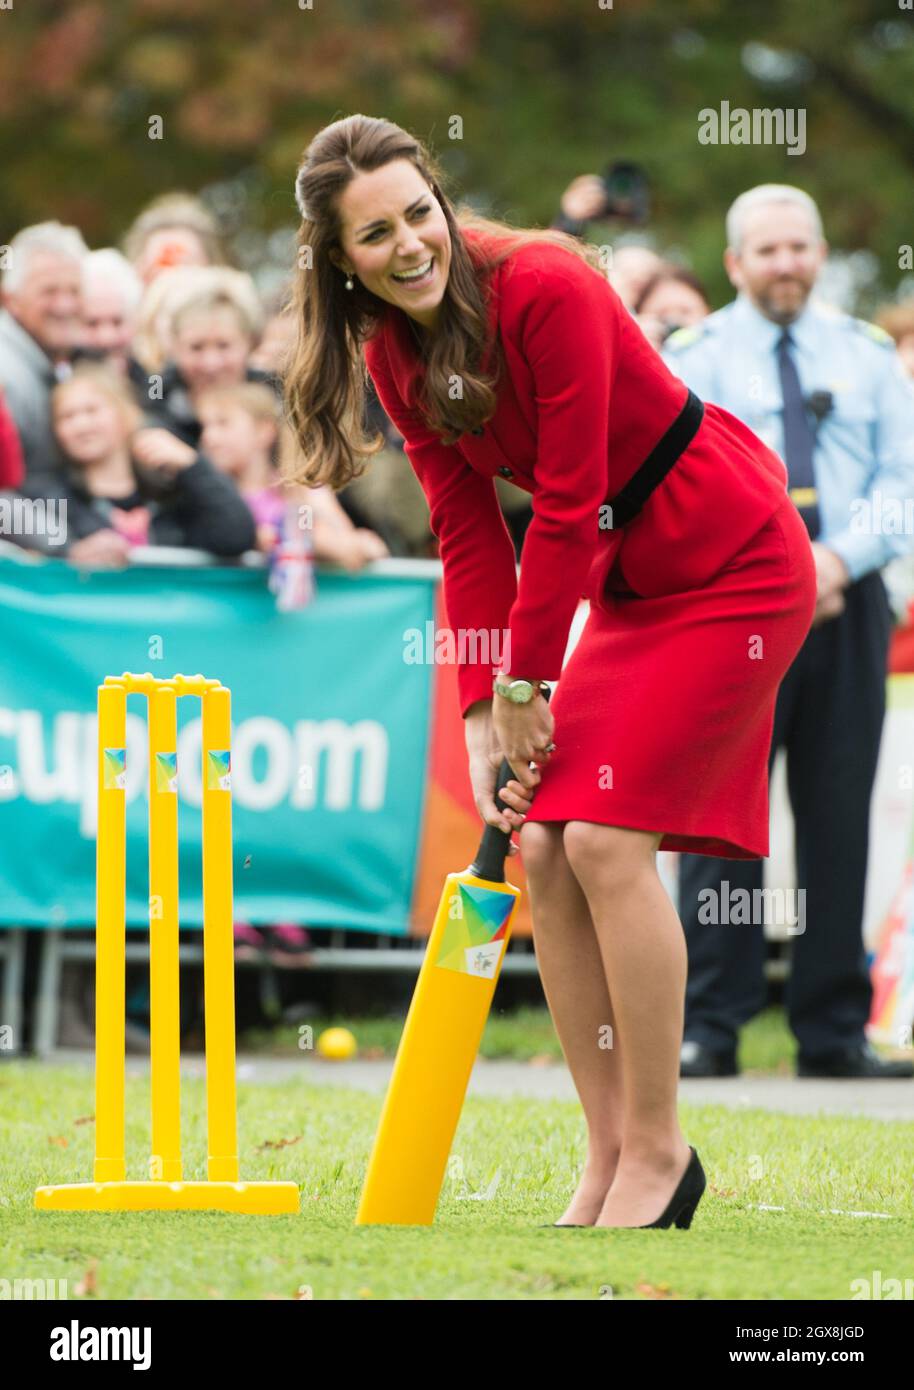 Catherine Duchess of Cambridge, wearing her red Luisa Spagnoli suit, bats during a game of cricket in a 2015 Cricket World Cup event in Christchurch, New Zealand on April 14, 2014.  Stock Photo